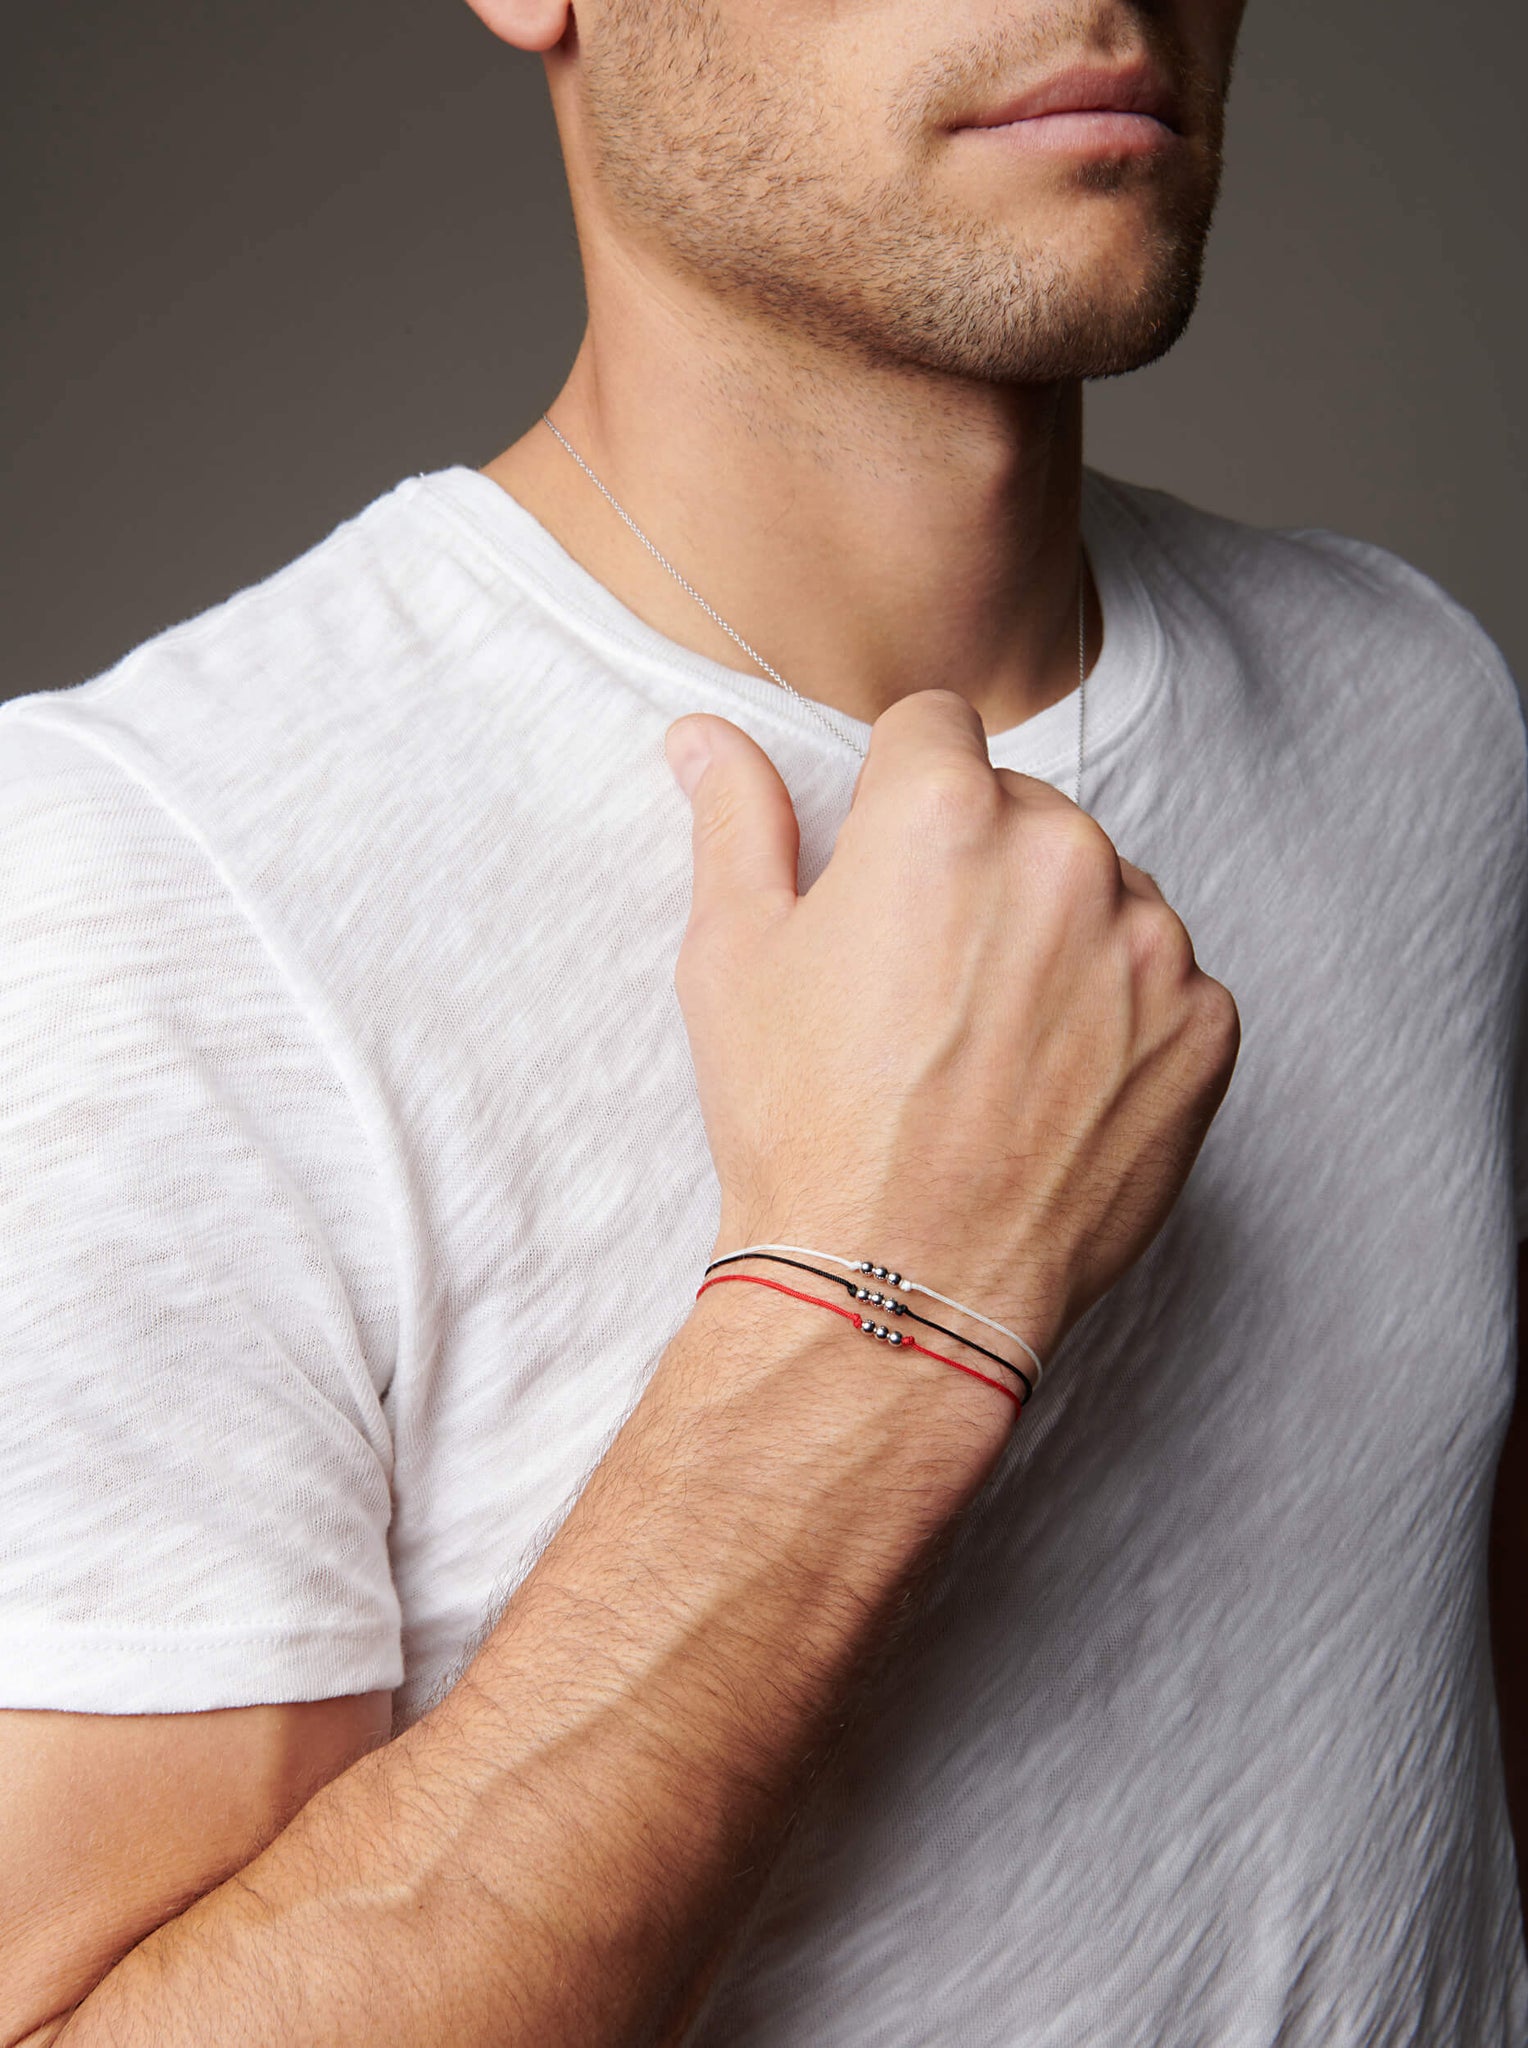 Arm bent towards face with wrist facing outward wearing string bracelets